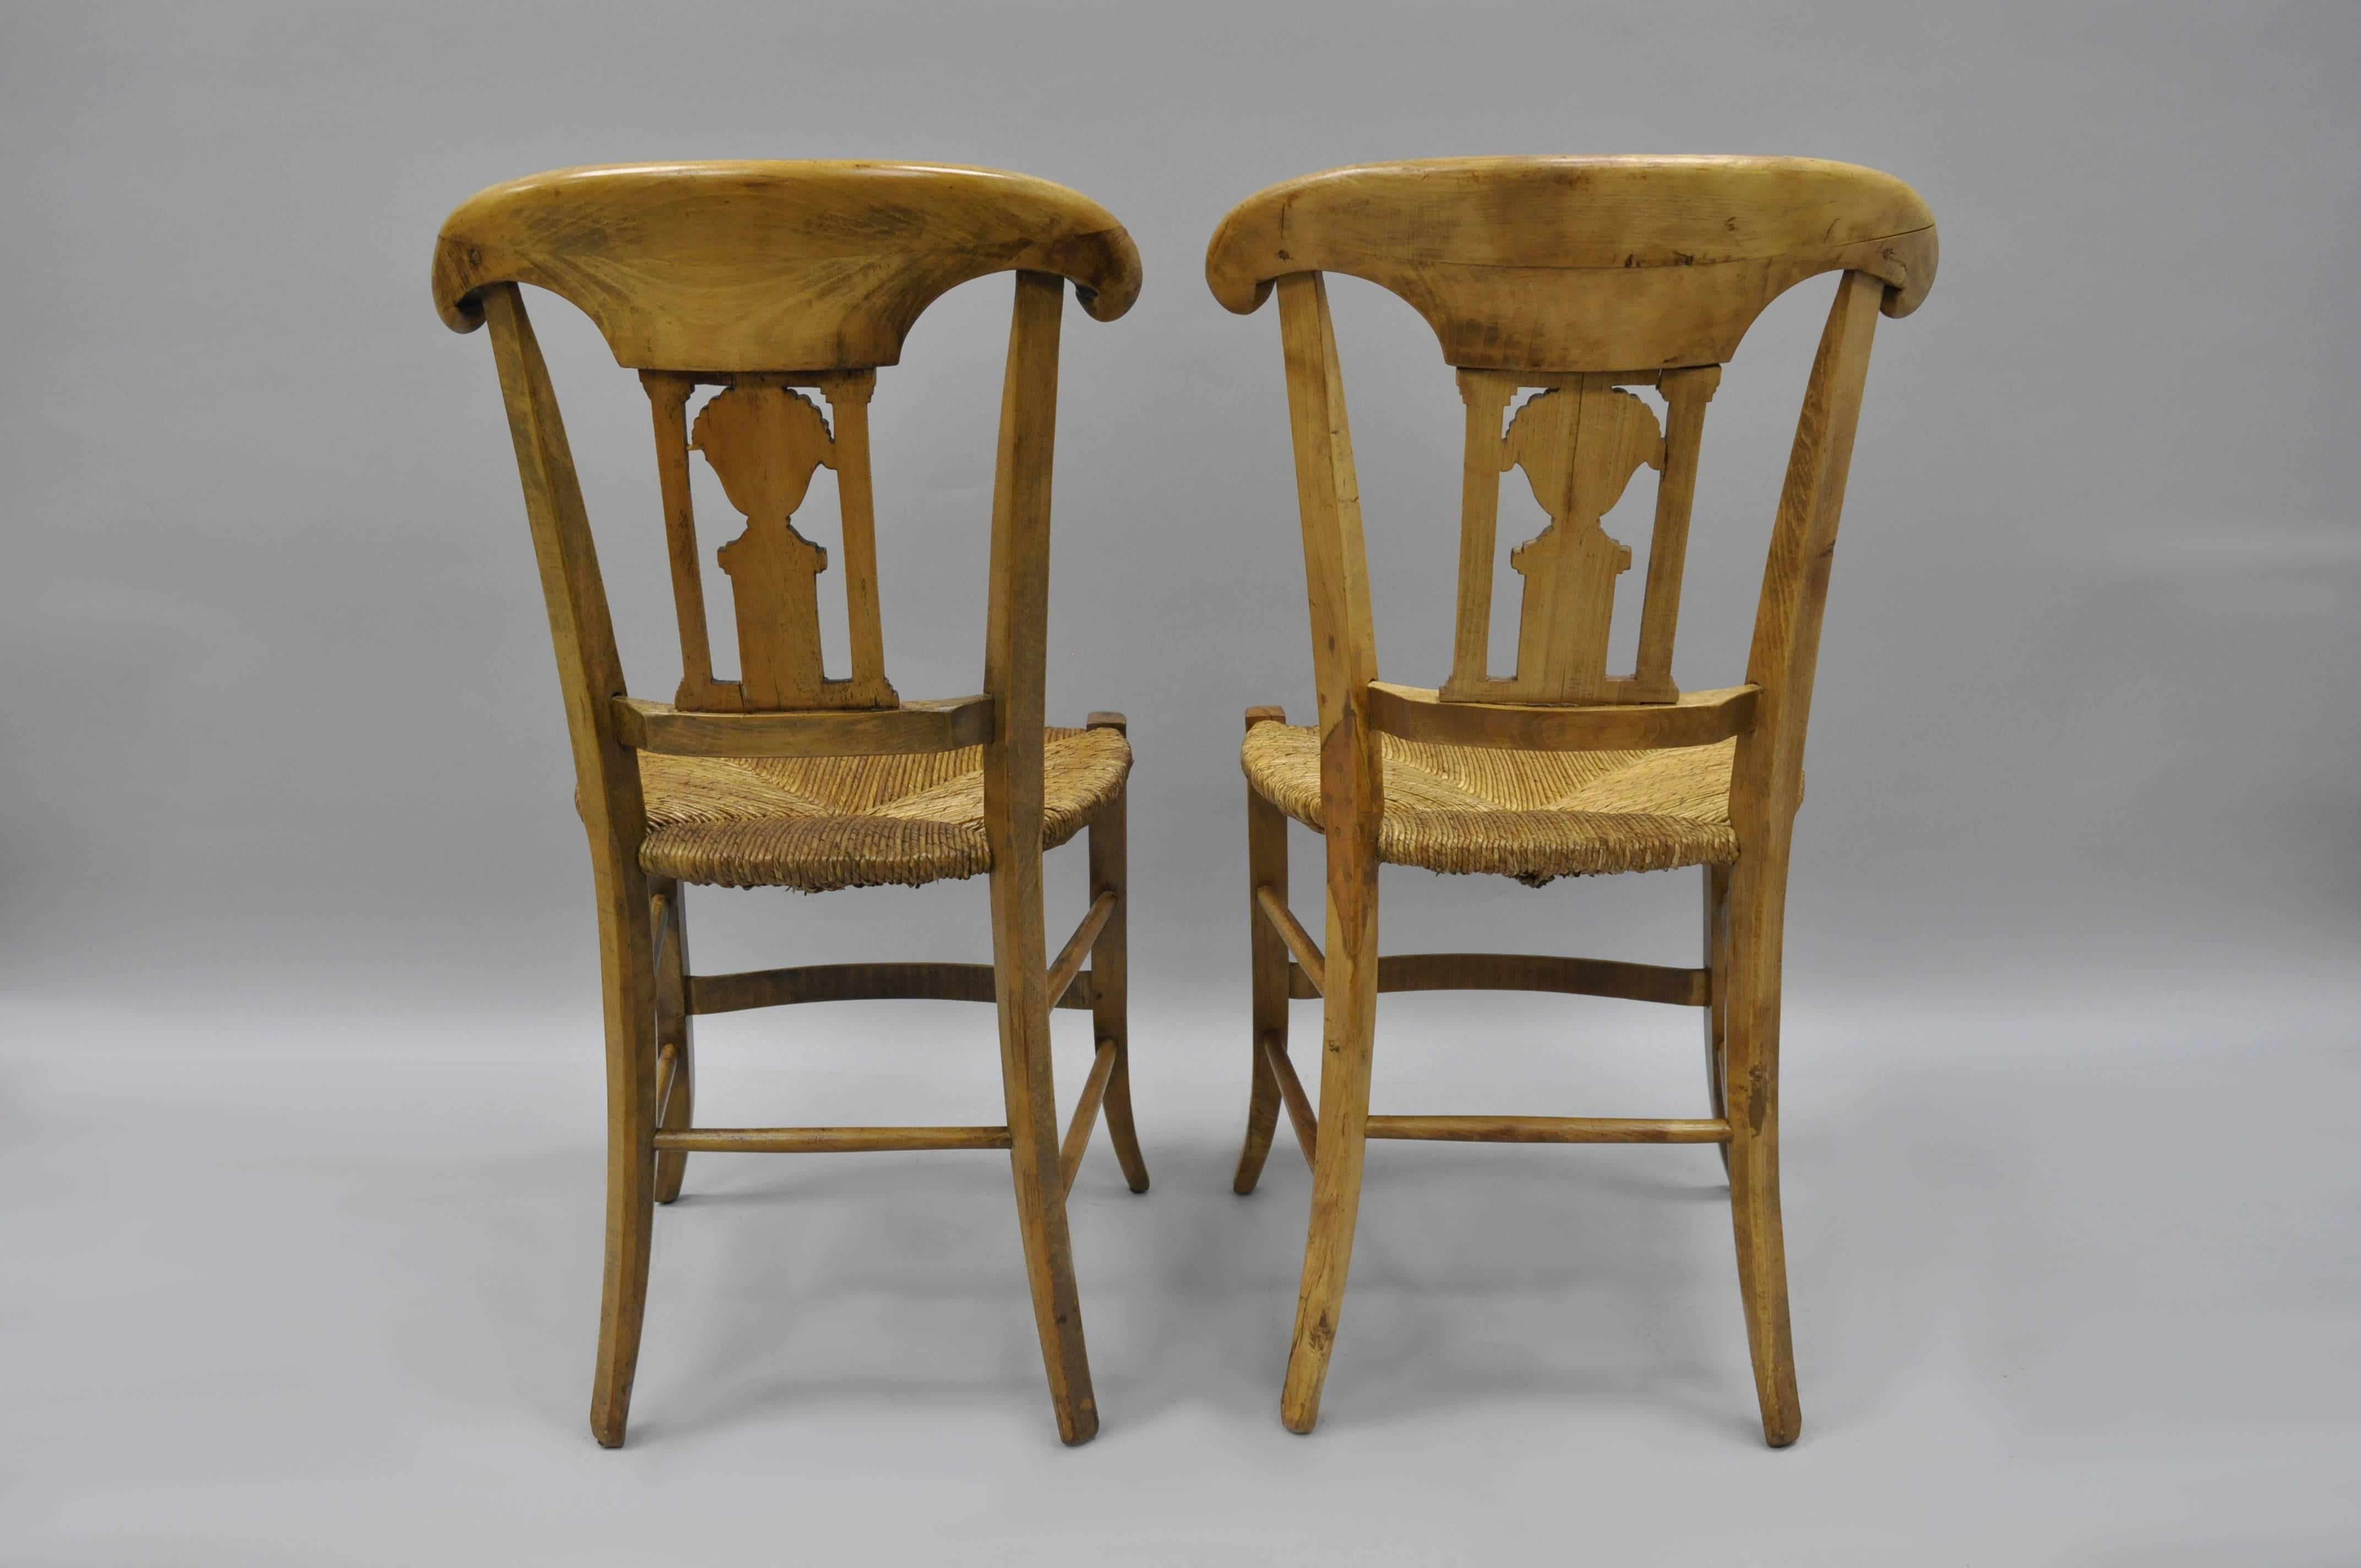 Hand-Carved Cherrywood Primitive Country French Dining Chairs Woven Rush Seats Set of Four